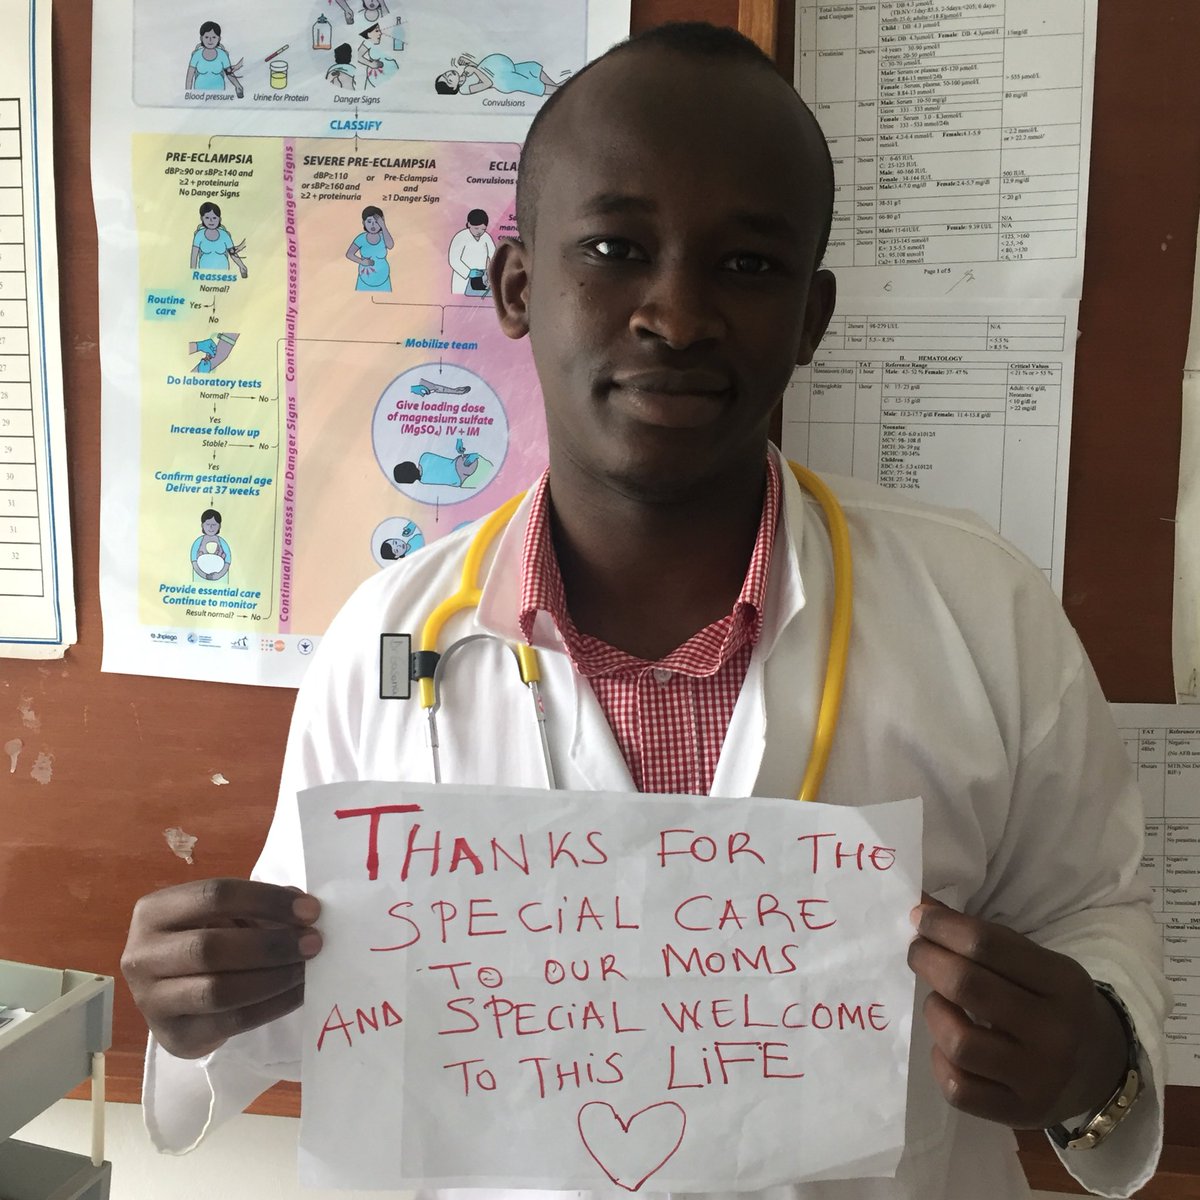 ✅ Challenge accepted on this #IDM2020 

Midwives are our heroes full of compassion and empathy.

Let us support & celebrate #midwives 🇷🇼 

🔈 I challenge  @UNFPAFellows @JEANBERCHMA @julesgreat @ConsortRwanda @UNFPARwanda 
#Thankamidwifechallenge